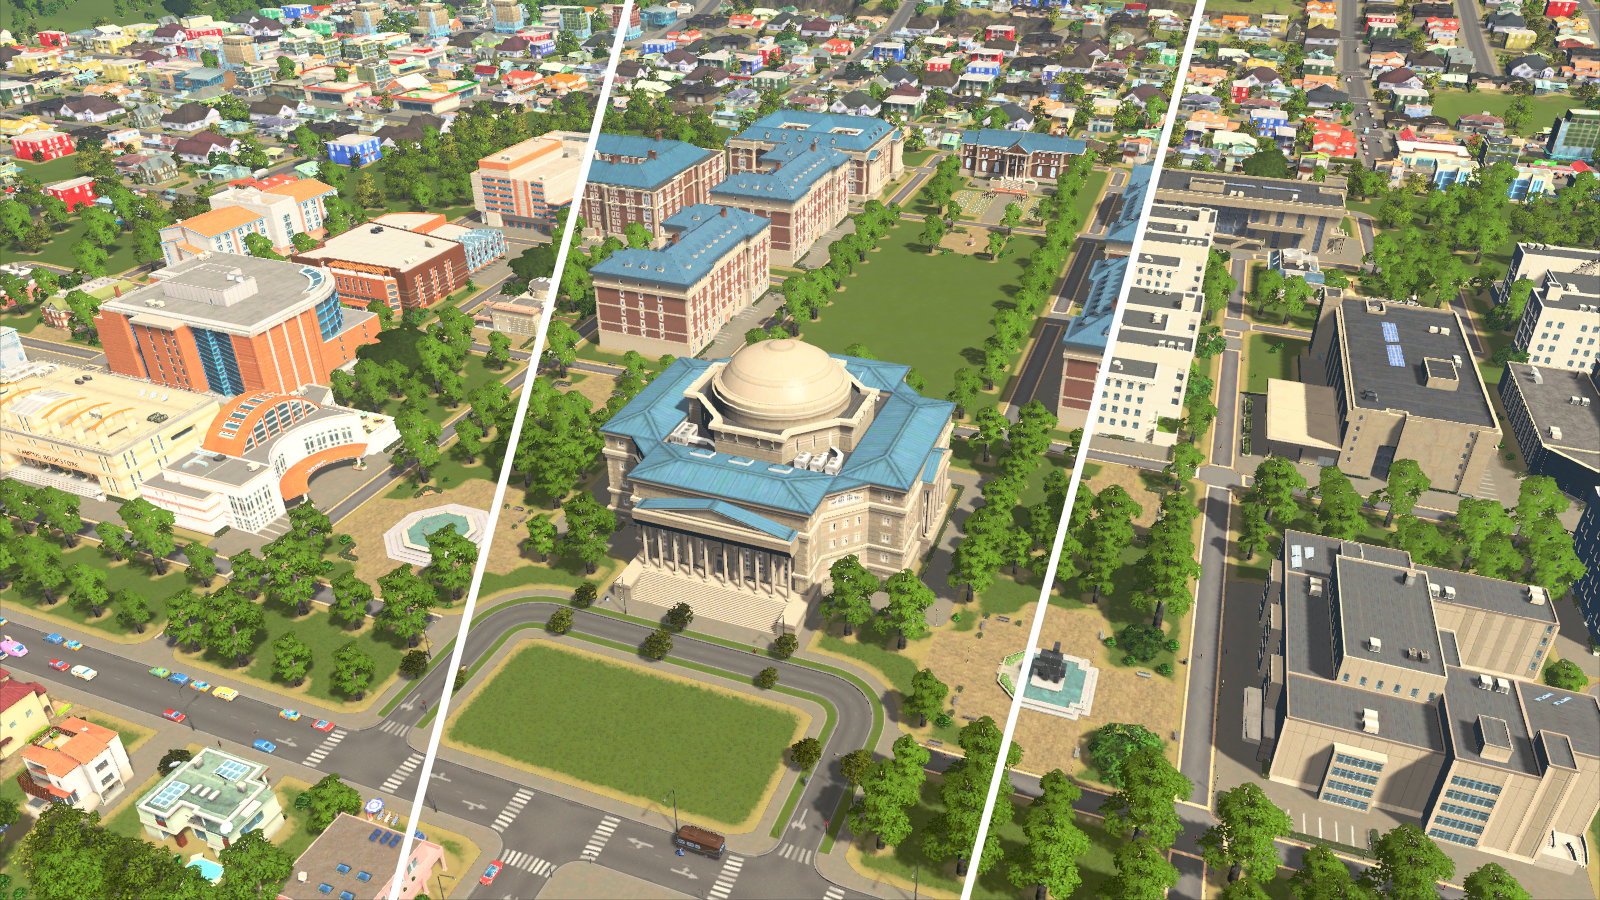 Cities: Skylines, Cities: Skylines - Campus, Colossal Order, Paradox Interactive